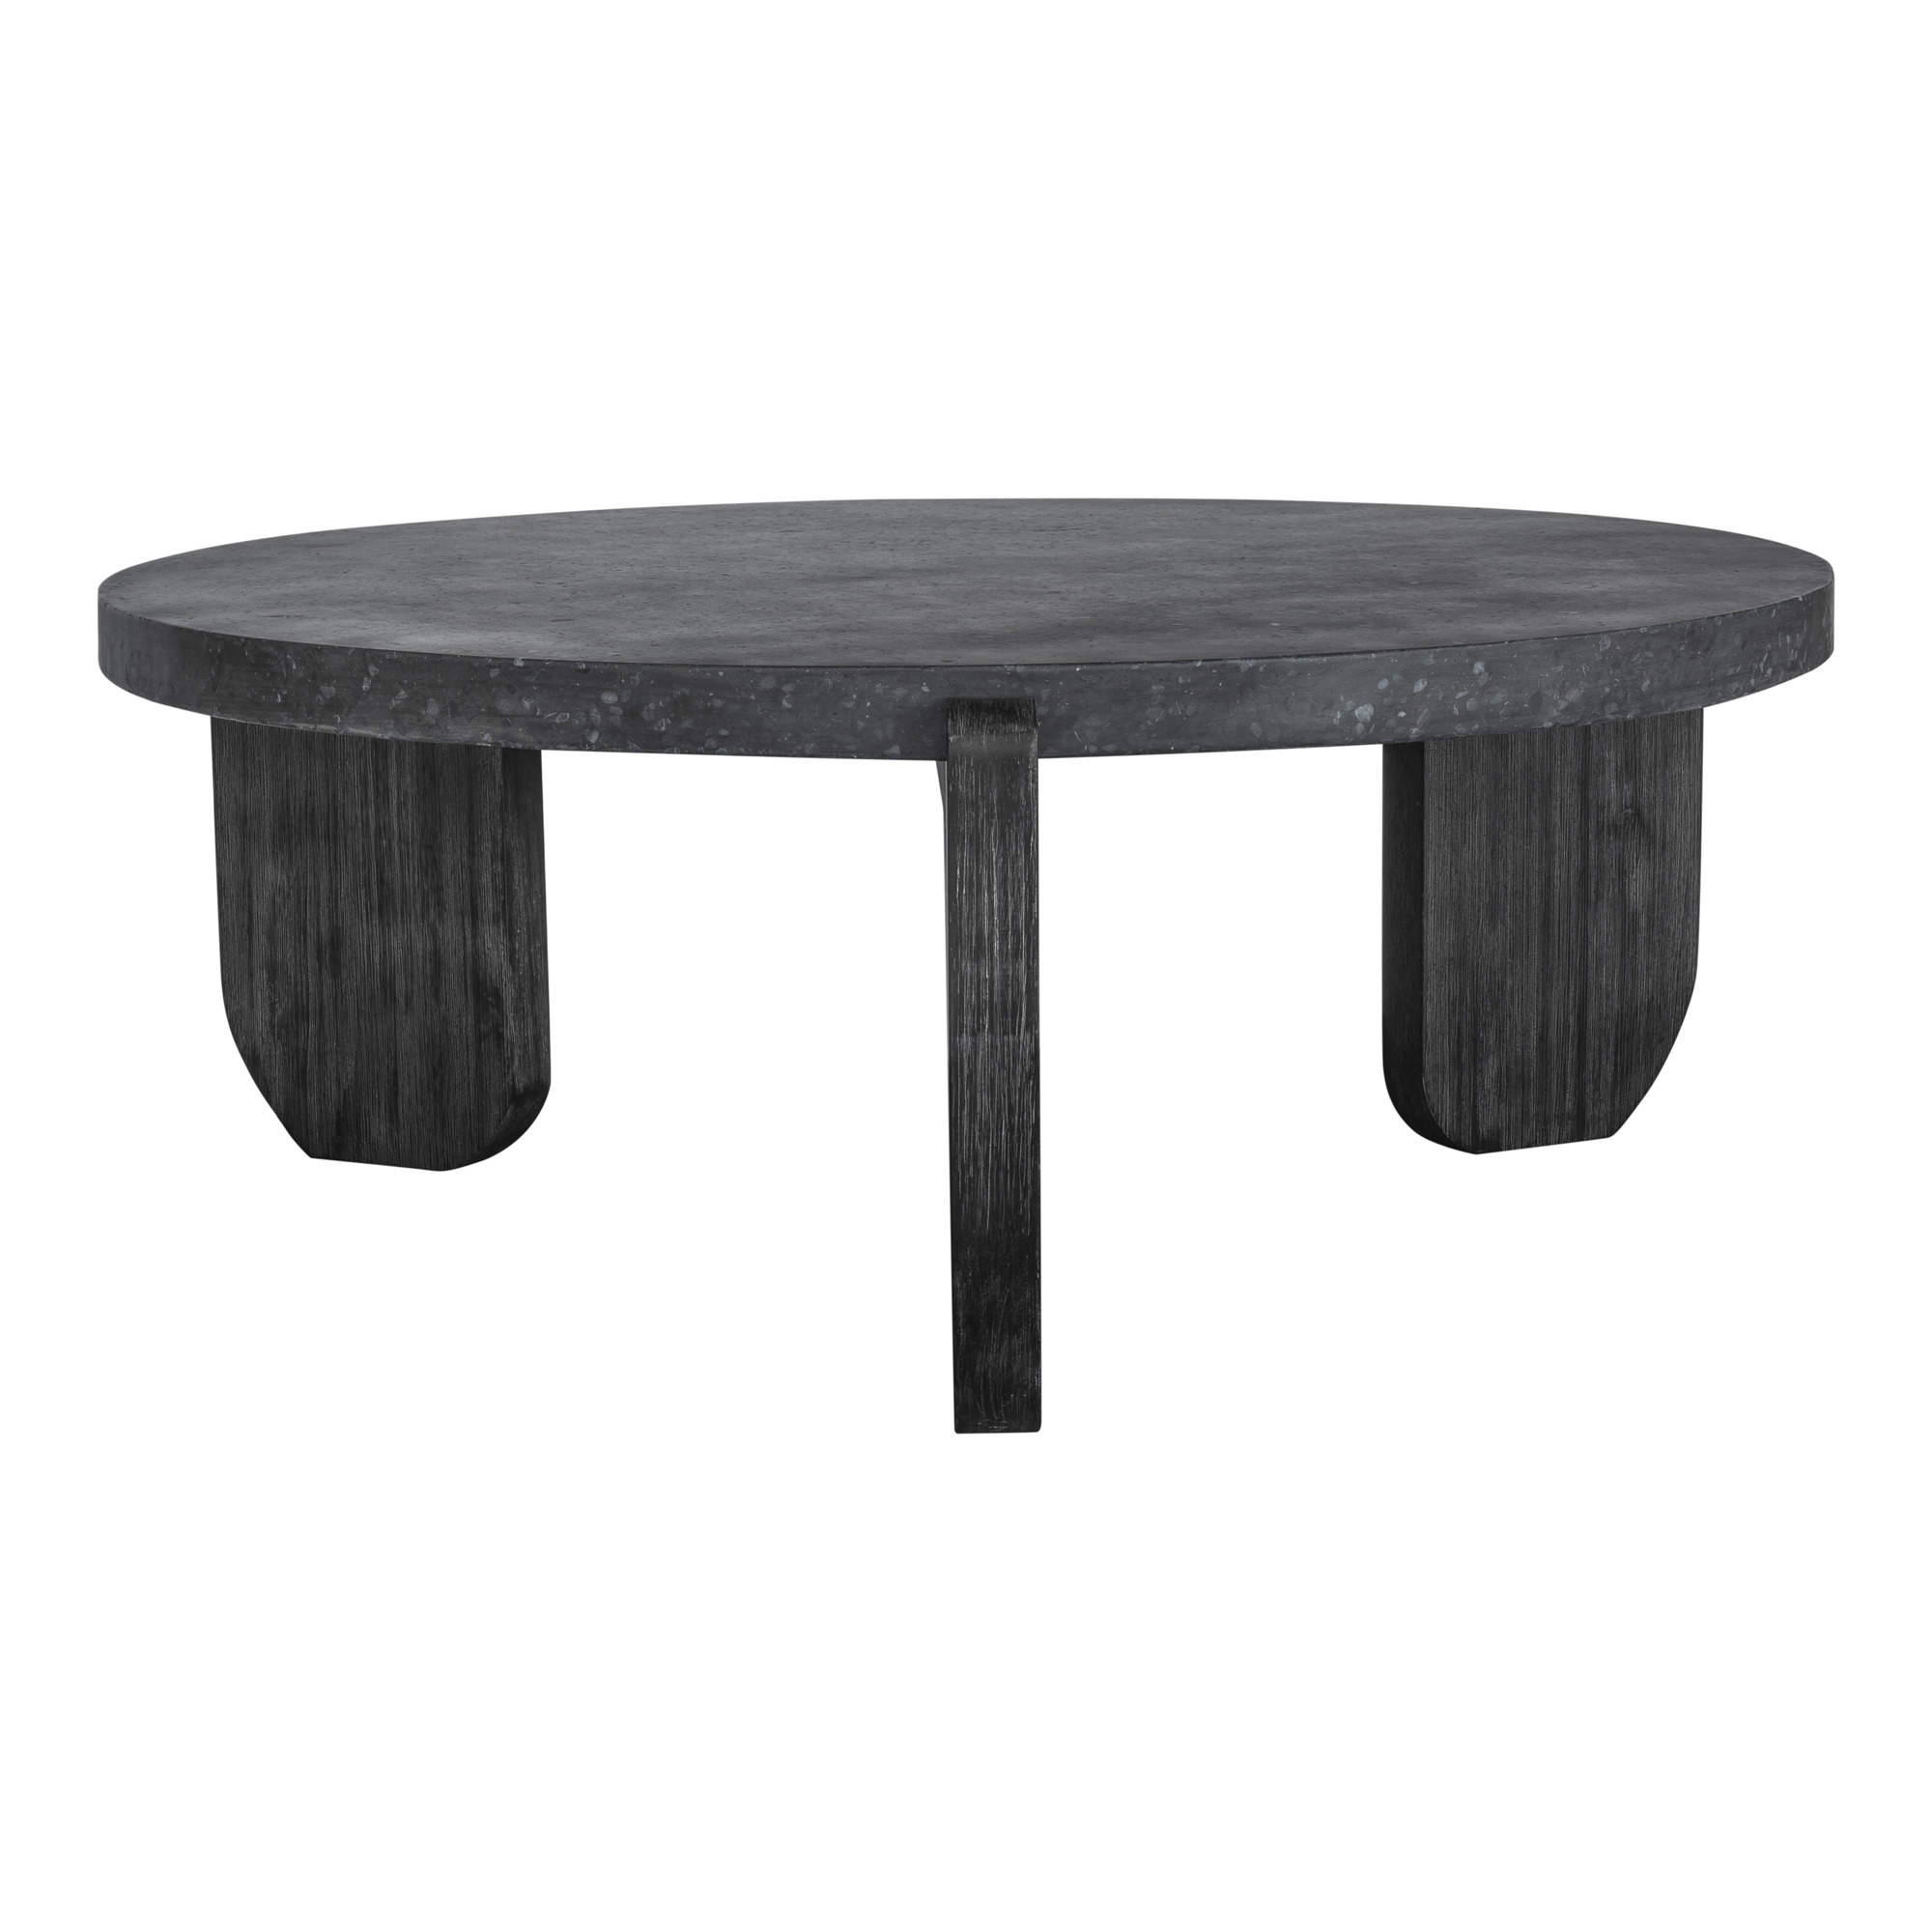 WUNDER COFFEE TABLE - Image 2